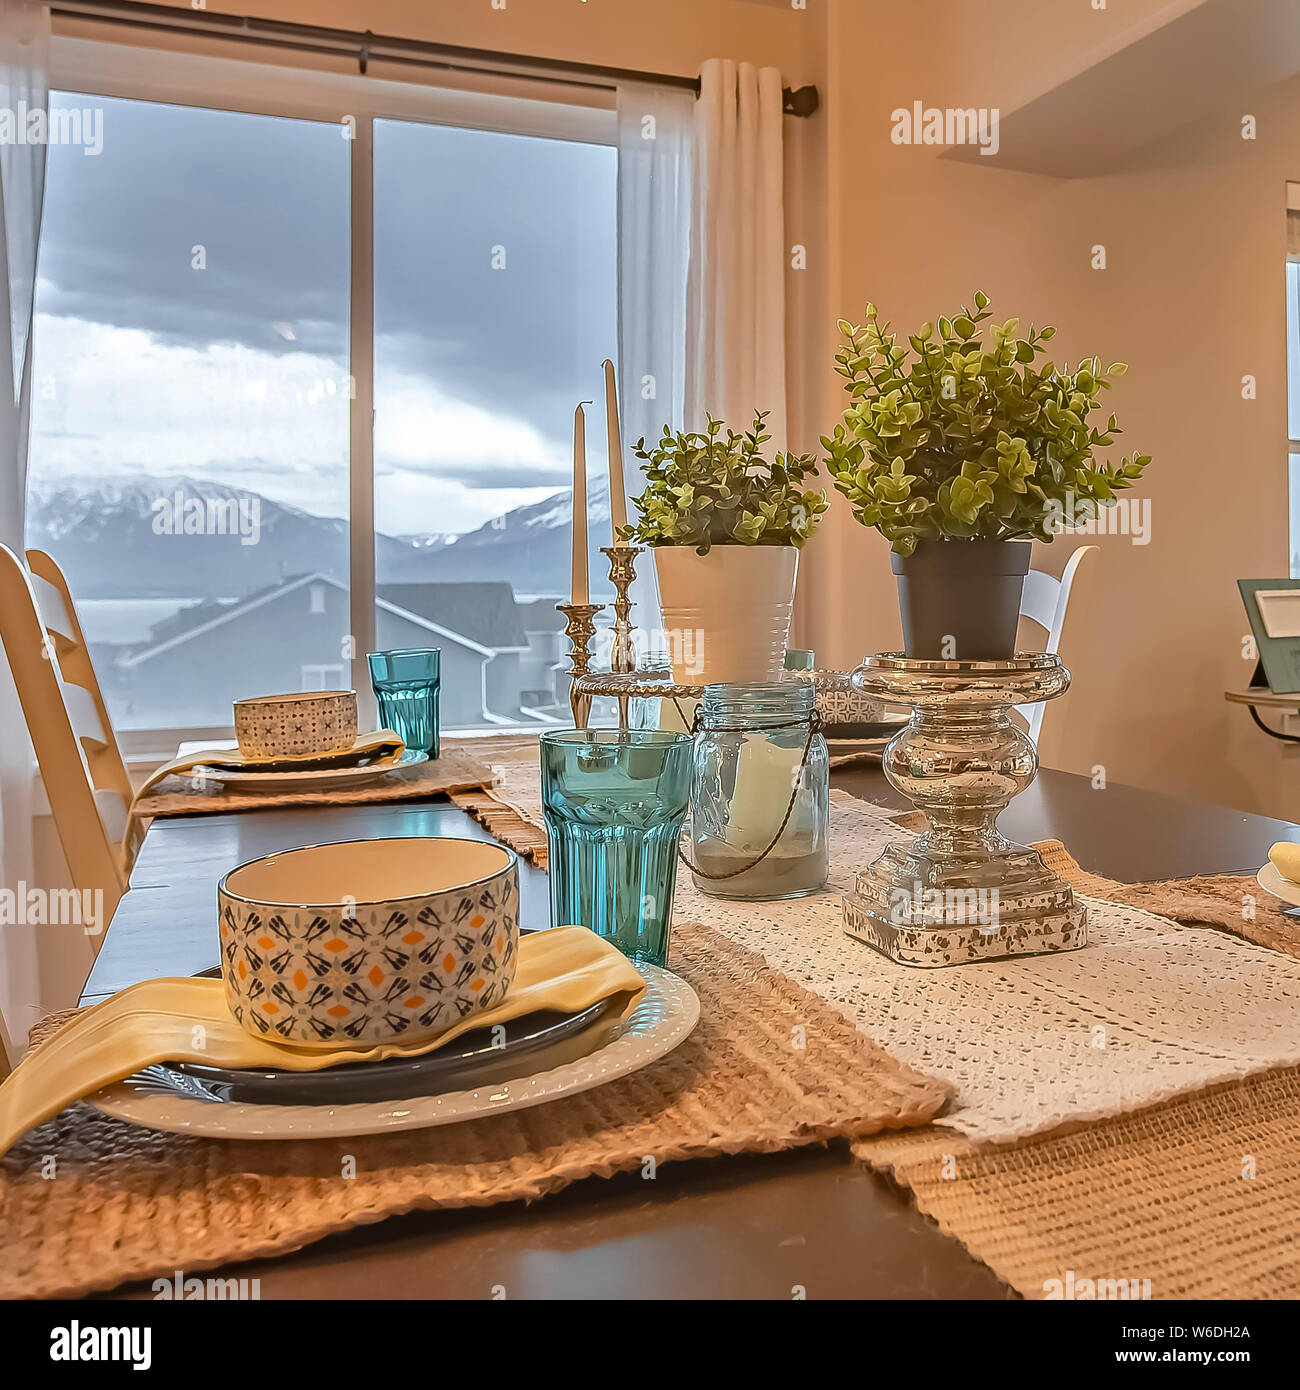 Square frame Lovely dining setting with hemp table runner and placemats on  the wooden table Stock Photo - Alamy